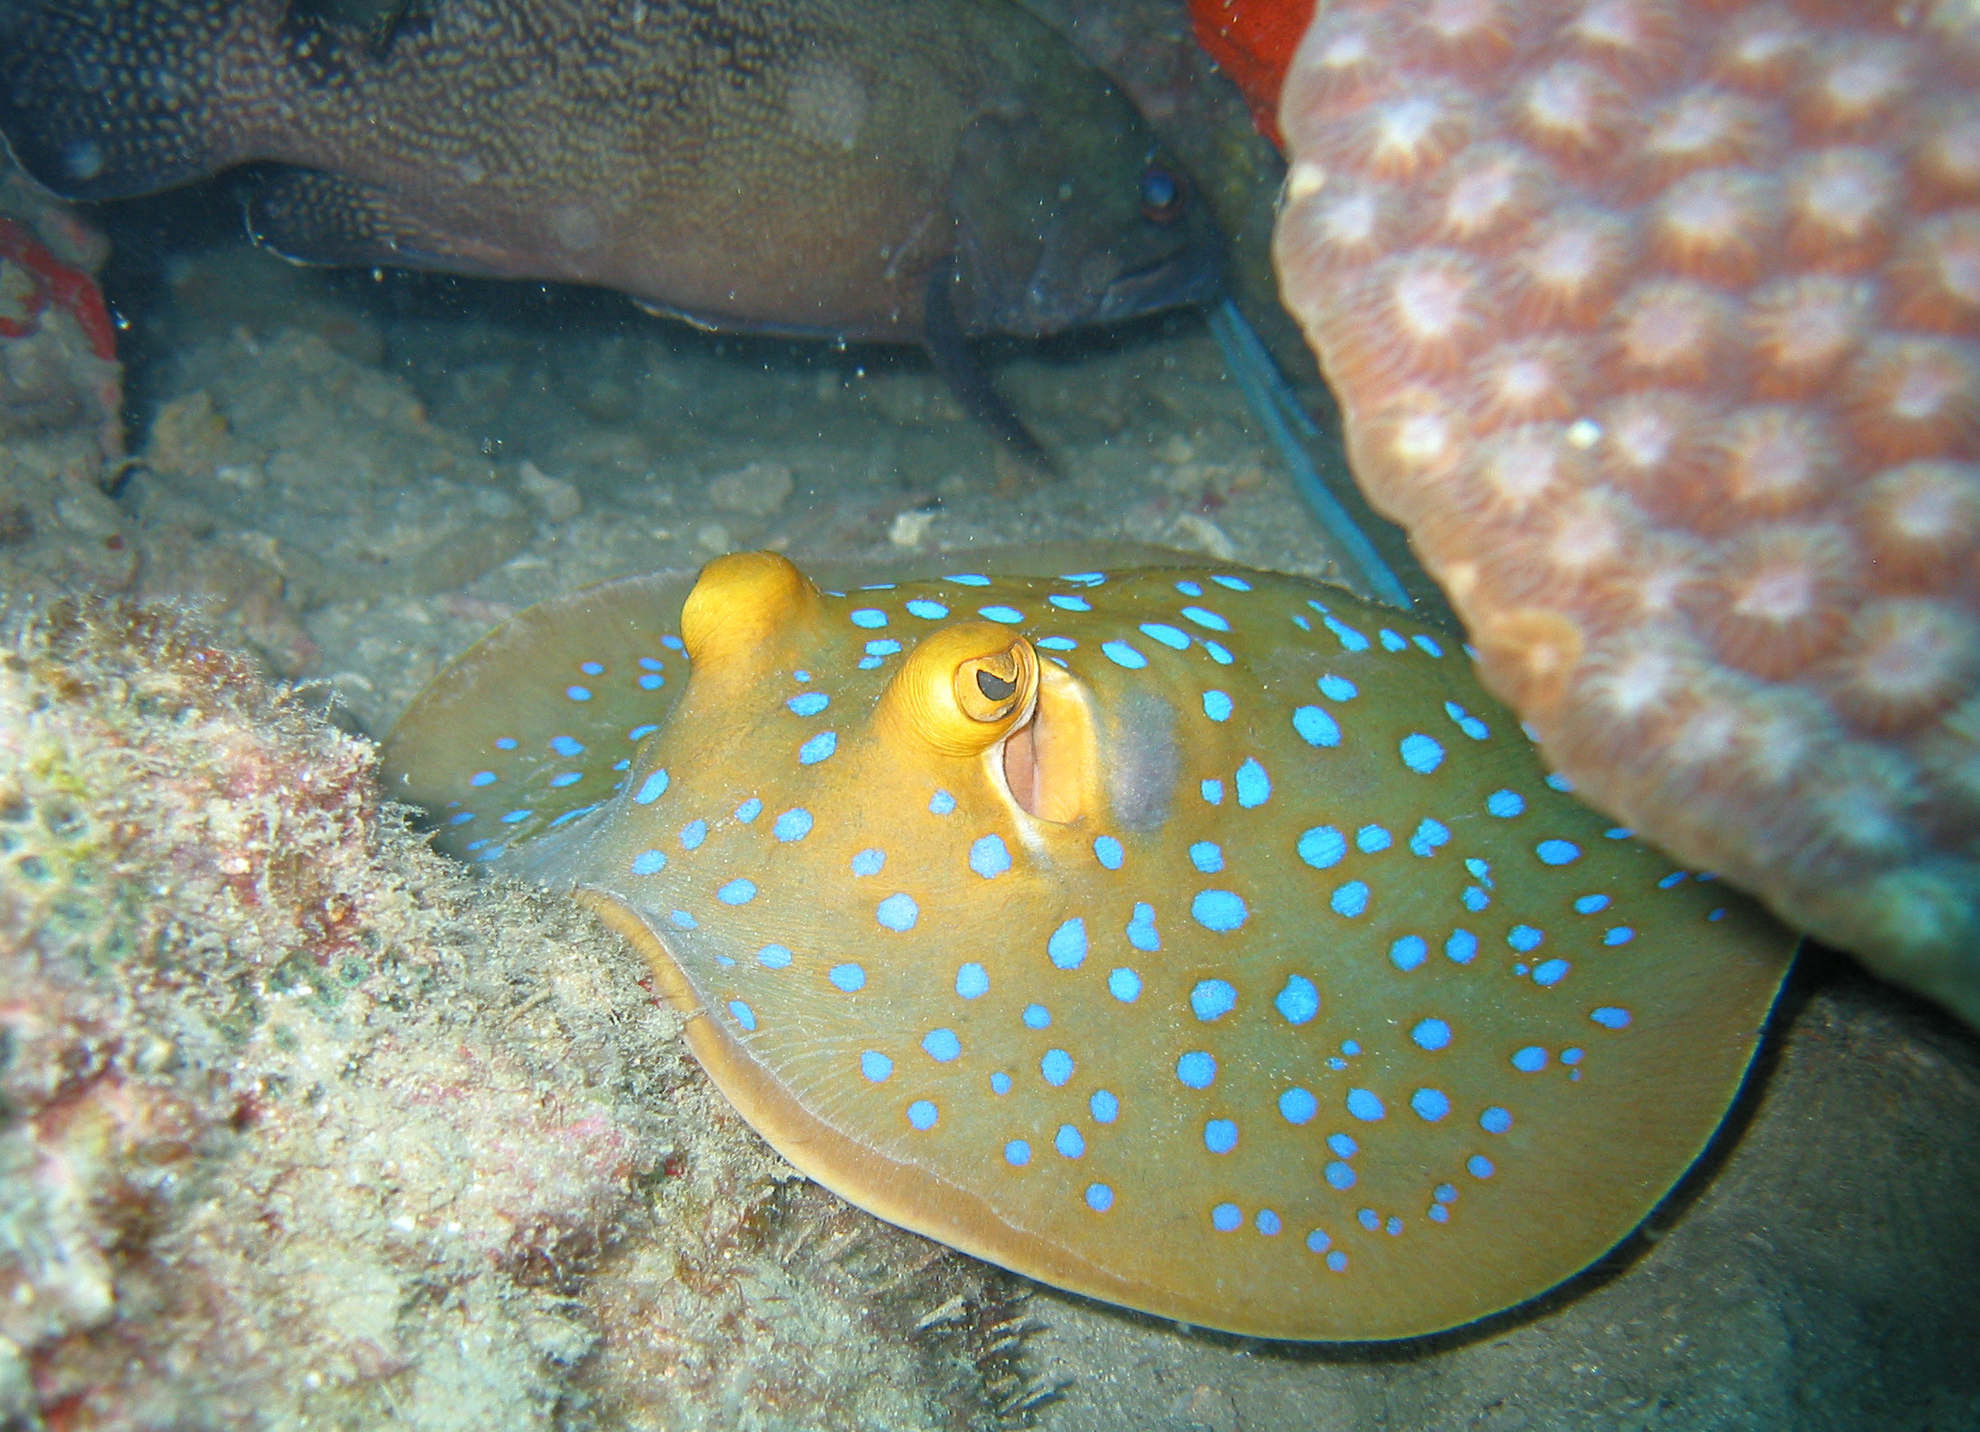 File:Blue spotted stingray.jpg - Wikimedia Commons